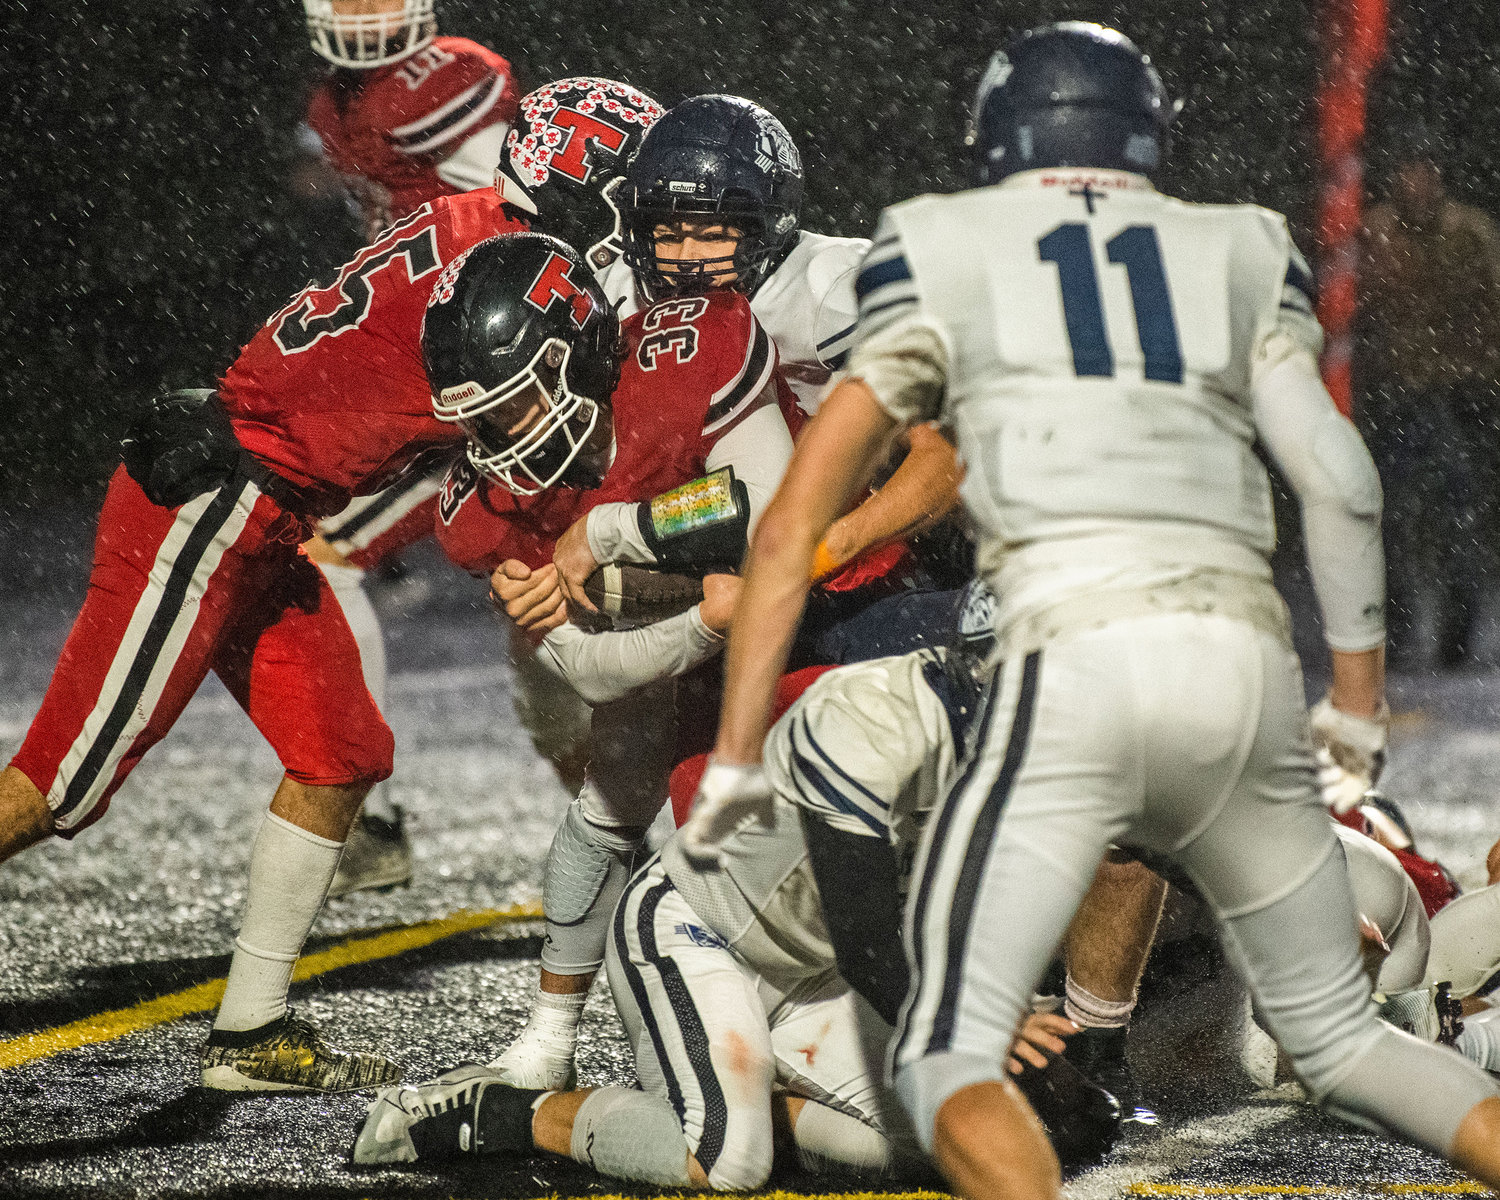 Tenino sophomore Tyler Minerich (33) wraps up the football on a run Friday night at Beaver Stadium during a game against the King’s Way Christian Knights.